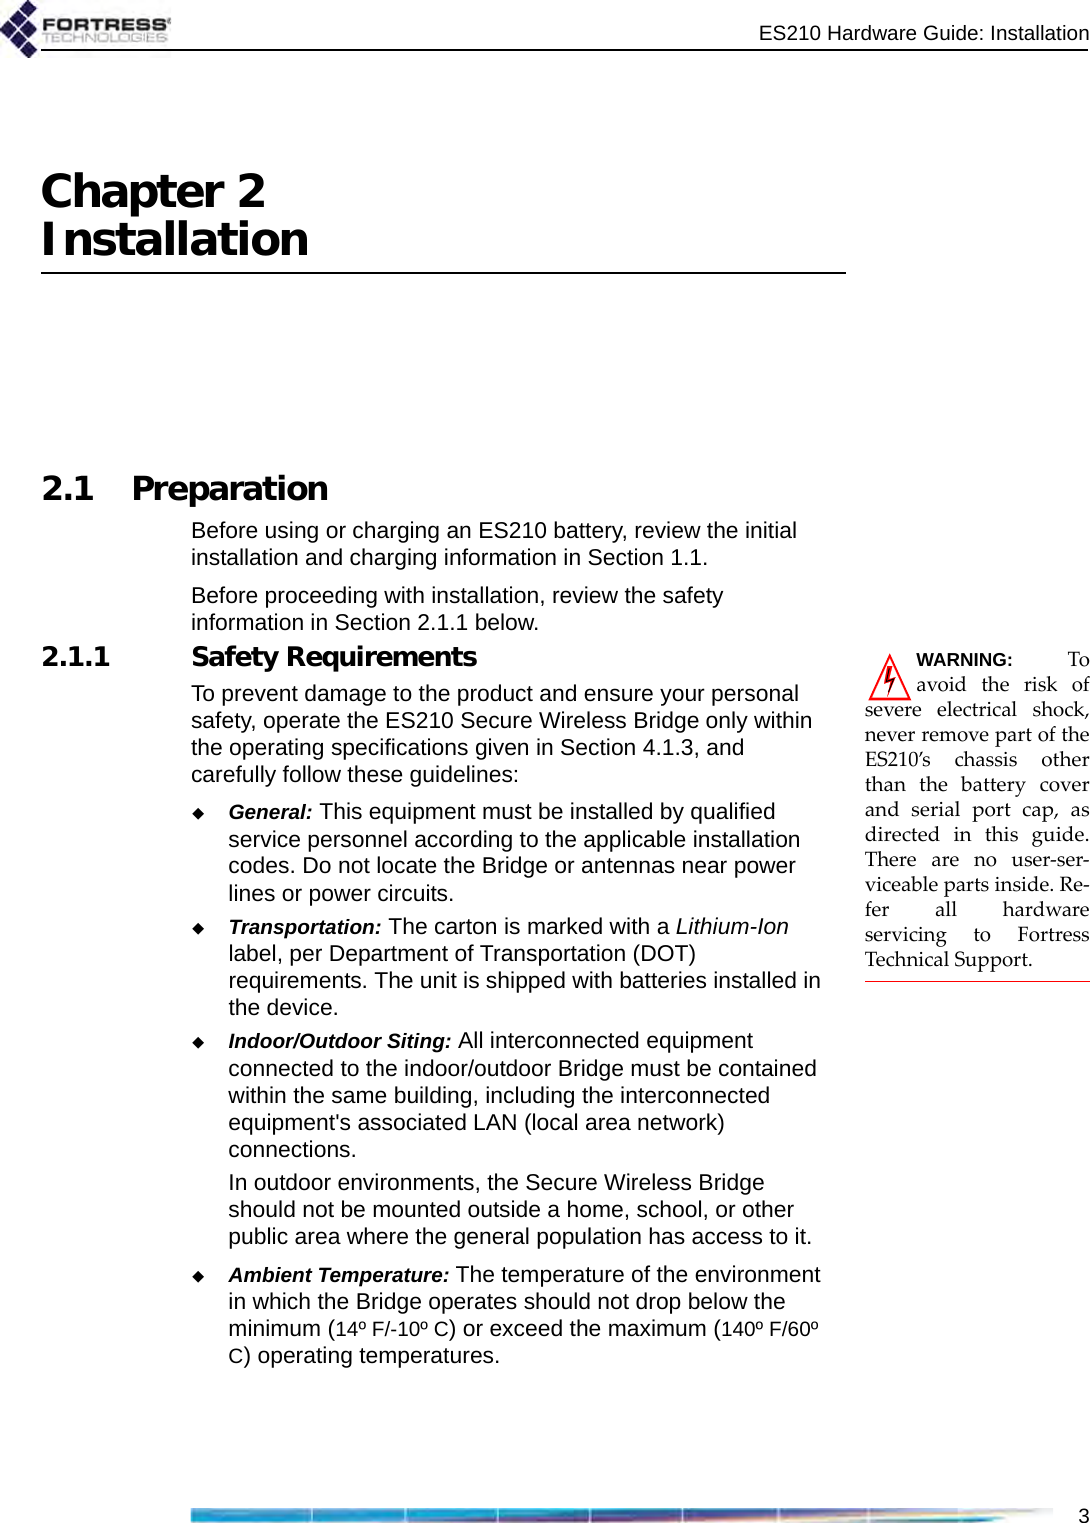 ES210 Hardware Guide: Installation3Chapter 2Installation2.1 PreparationBefore using or charging an ES210 battery, review the initial installation and charging information in Section 1.1.Before proceeding with installation, review the safety information in Section 2.1.1 below. WARNING: Toavoid the risk ofsevere electrical shock,never remove part of theES210’s chassis otherthan the battery coverand serial port cap, asdirected in this guide.There are no user-ser-viceable parts inside. Re-fer all hardwareservicing to FortressTechnical Support.2.1.1 Safety RequirementsTo prevent damage to the product and ensure your personal safety, operate the ES210 Secure Wireless Bridge only within the operating specifications given in Section 4.1.3, and carefully follow these guidelines: General: This equipment must be installed by qualified service personnel according to the applicable installation codes. Do not locate the Bridge or antennas near power lines or power circuits.Transportation: The carton is marked with a Lithium-Ion label, per Department of Transportation (DOT) requirements. The unit is shipped with batteries installed in the device.Indoor/Outdoor Siting: All interconnected equipment connected to the indoor/outdoor Bridge must be contained within the same building, including the interconnected equipment&apos;s associated LAN (local area network) connections.In outdoor environments, the Secure Wireless Bridge should not be mounted outside a home, school, or other public area where the general population has access to it. Ambient Temperature: The temperature of the environment in which the Bridge operates should not drop below the minimum (14º F/-10º C) or exceed the maximum (140º F/60º C) operating temperatures. 